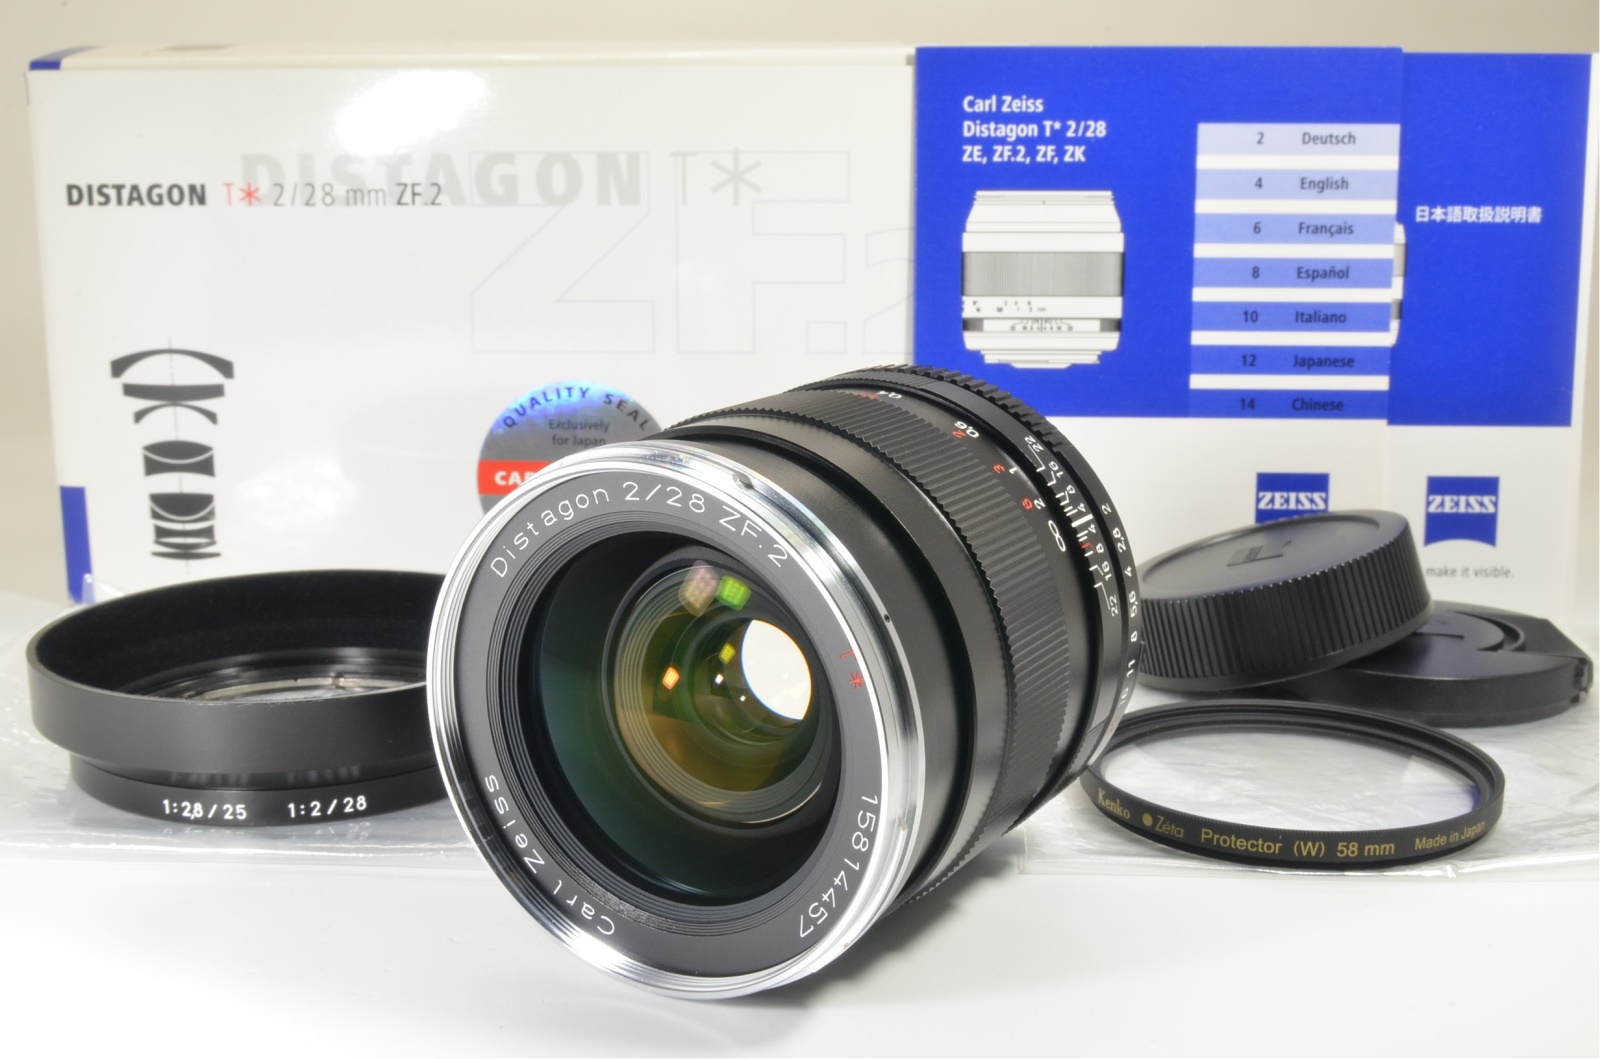 carl zeiss distagon t* 28mm f2 zf.2 lens for nikon f mount from japan